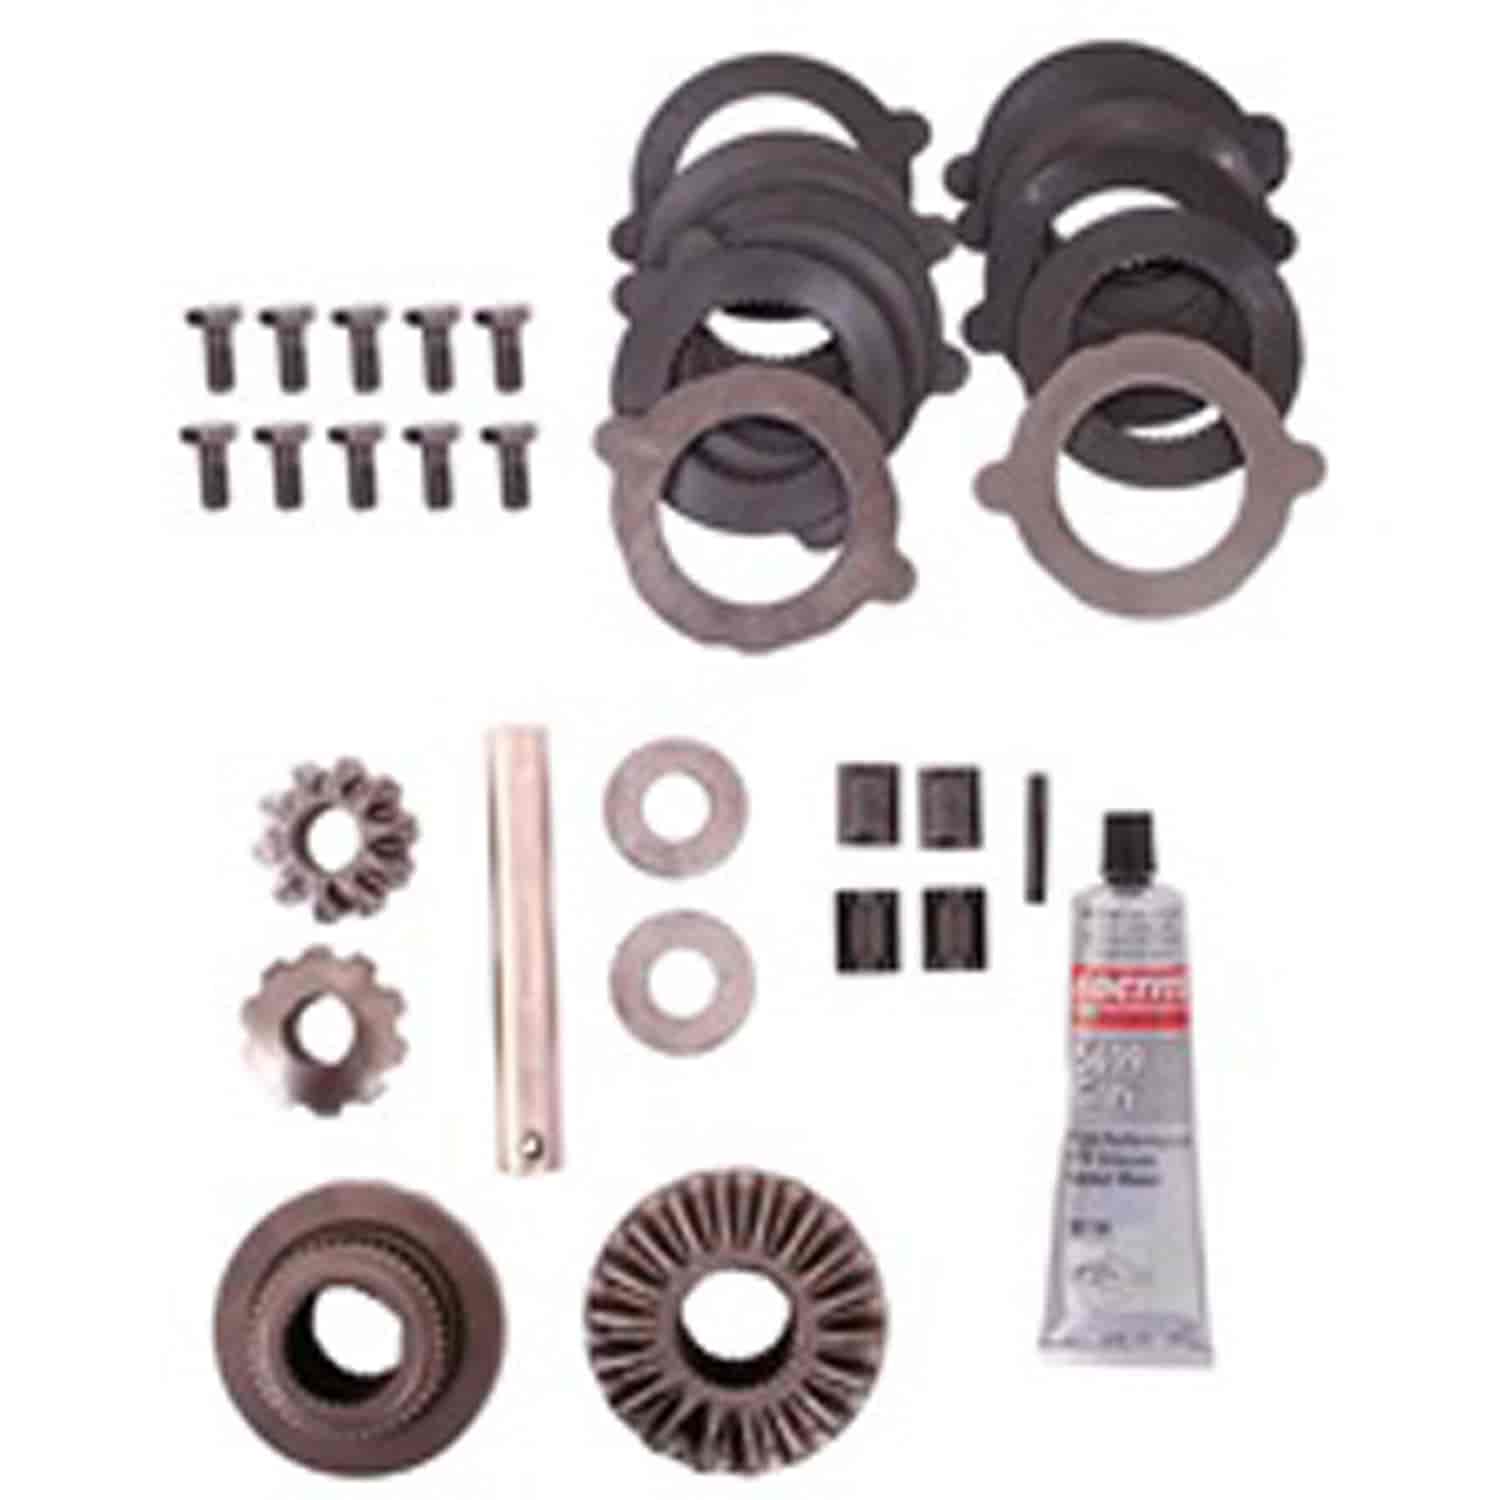 This spider gear kit from Omix-ADA fits 97-06 Jeep Wrangler TJ with Dana 44 Trac-Lok limited slip differentials.